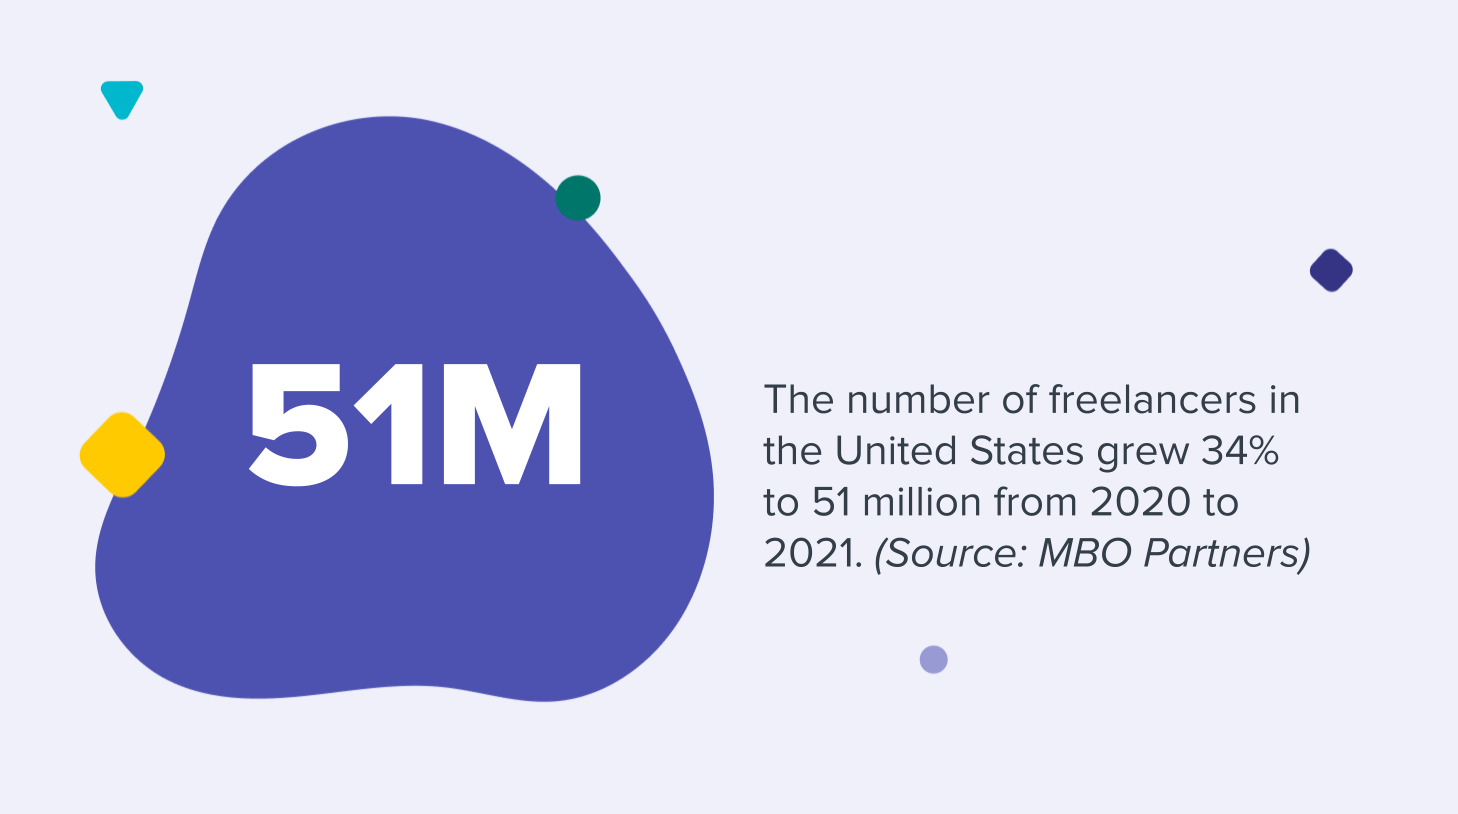 The number of freelancers in the United States grew 34% to 51 million from 2020 to 2021. (Source: MBO Partners)